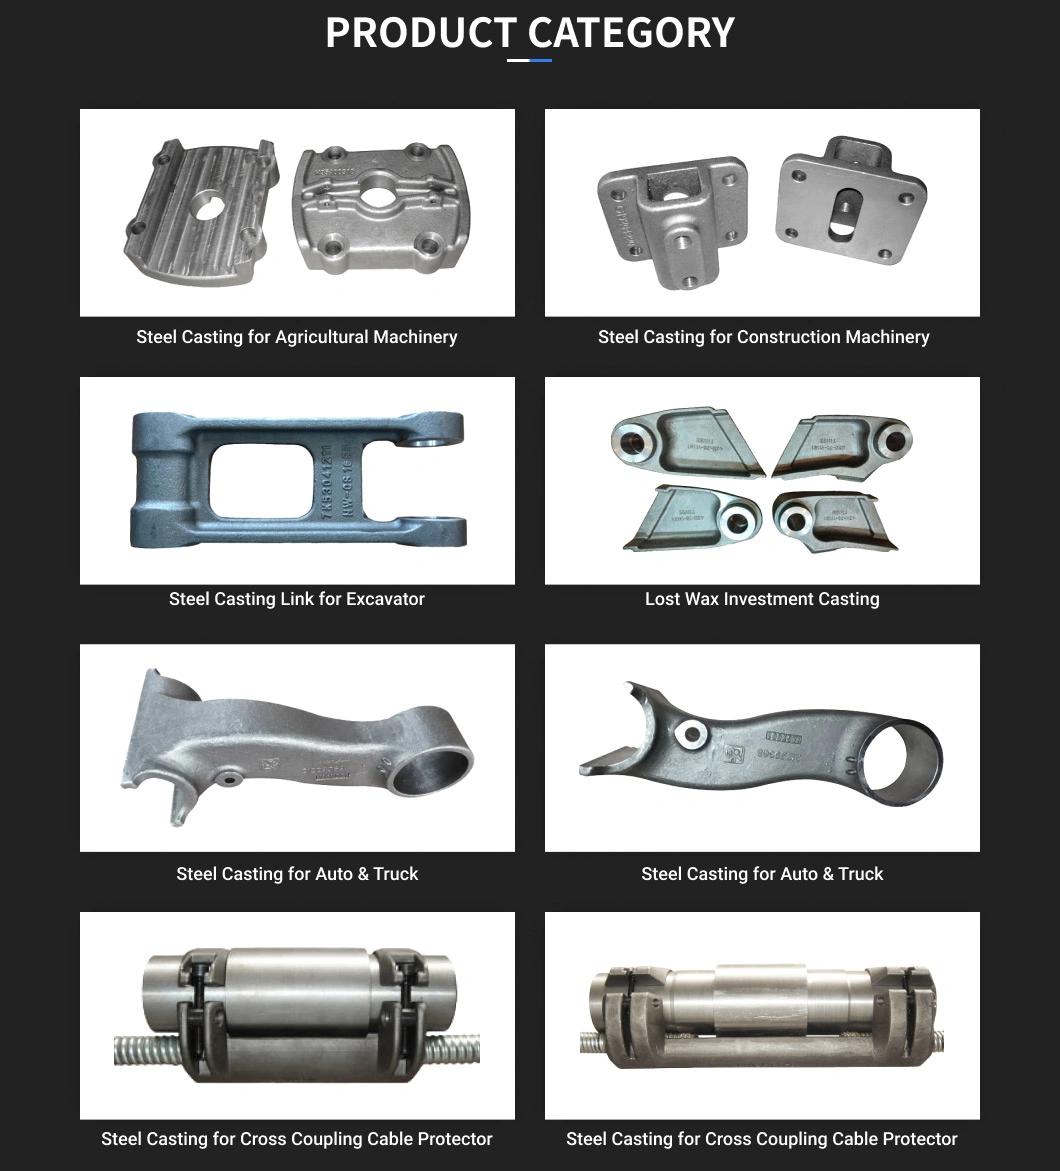 Top Technology Rapid Prototyping Reusable Metal Casting China with Low Price